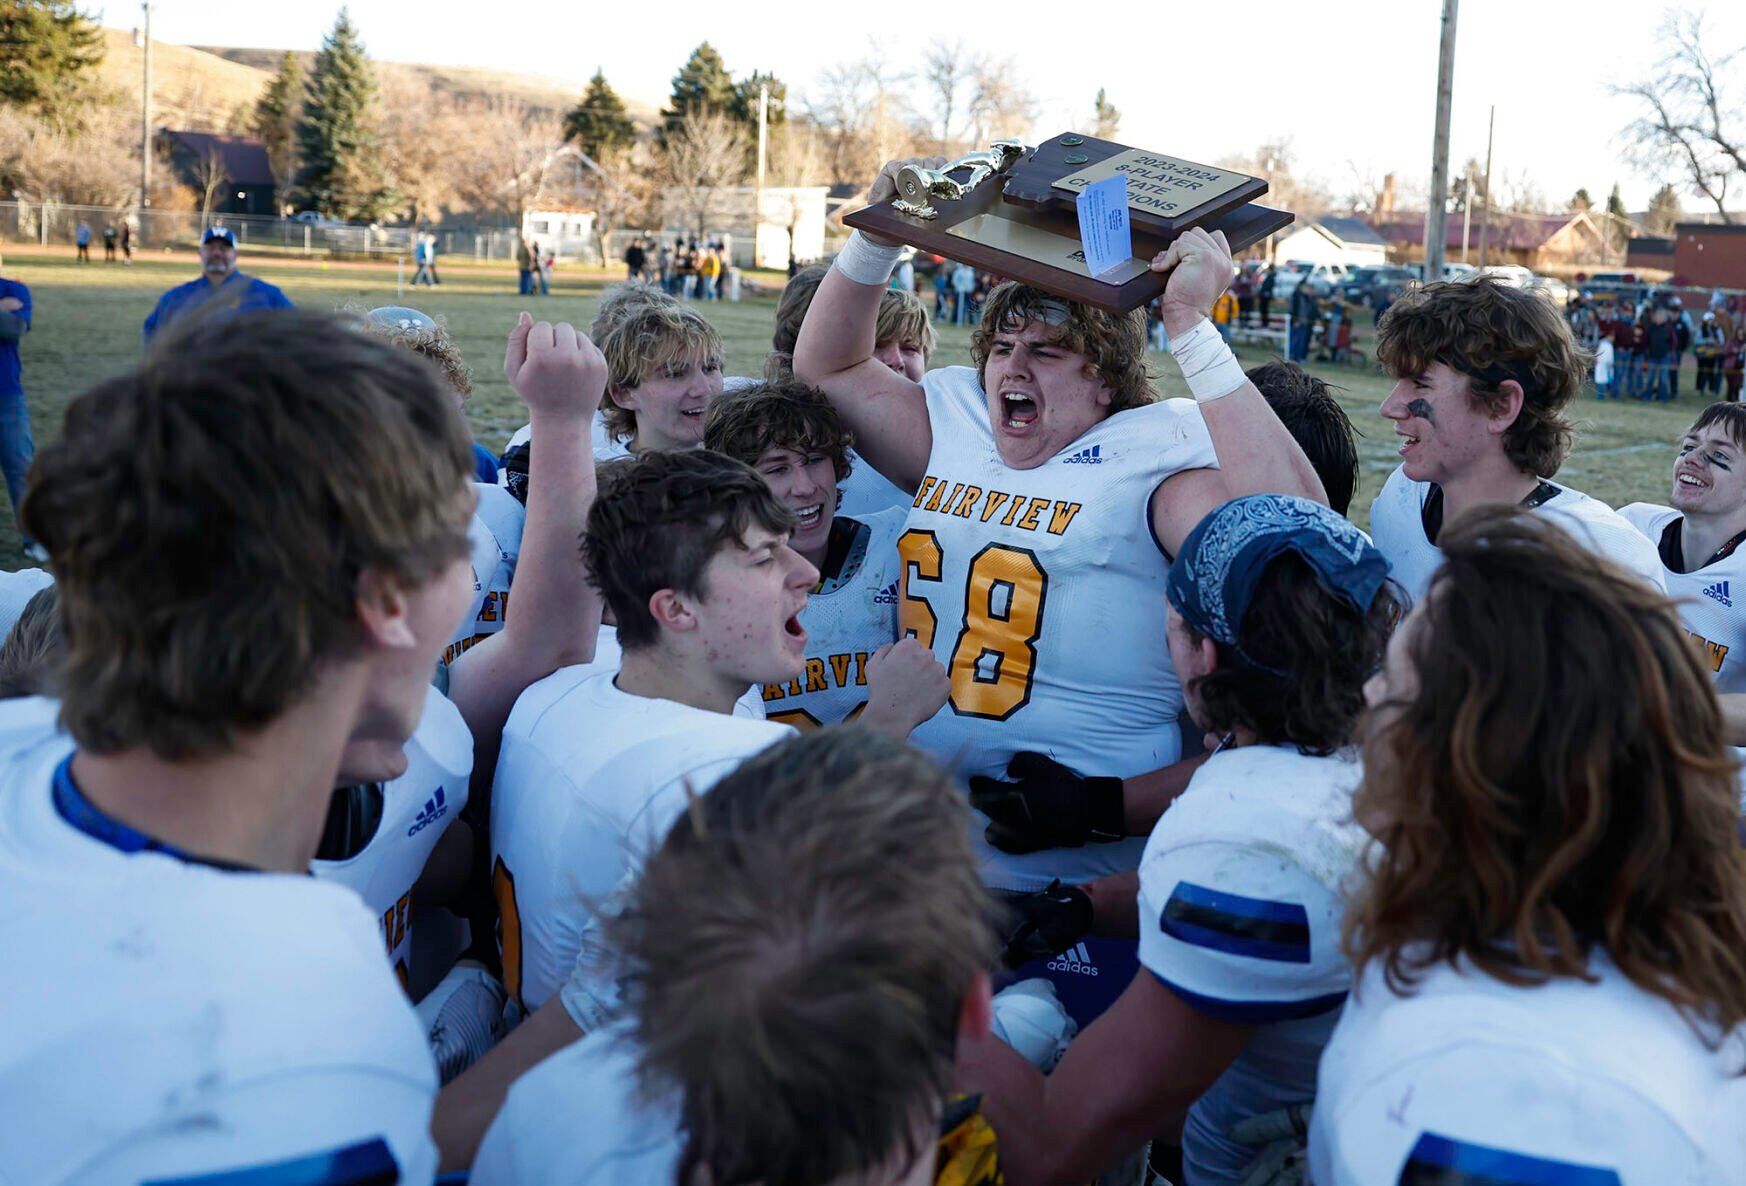 Fairview Warriors Win Second State Championship in Five Years with 40-28 Victory